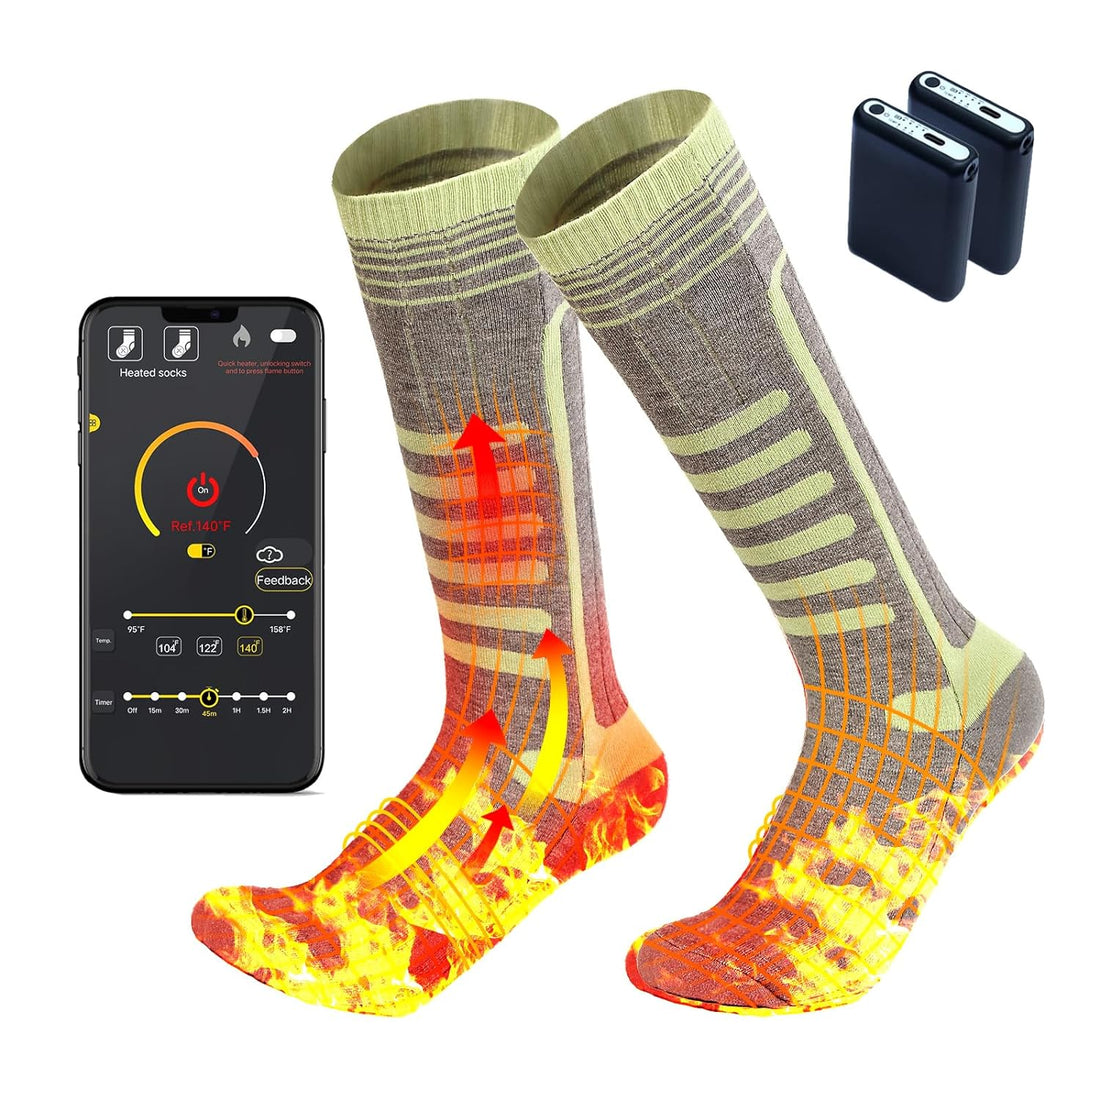 WEIVIOQ Rechargeable Heated Socks for Men Women,Upgraded 5000mAh Battery Electric Socks Foot Warmer with APP Control and 4 Heat Settings for Winter Outdoor Skiing Hiking Motorcycle Camping